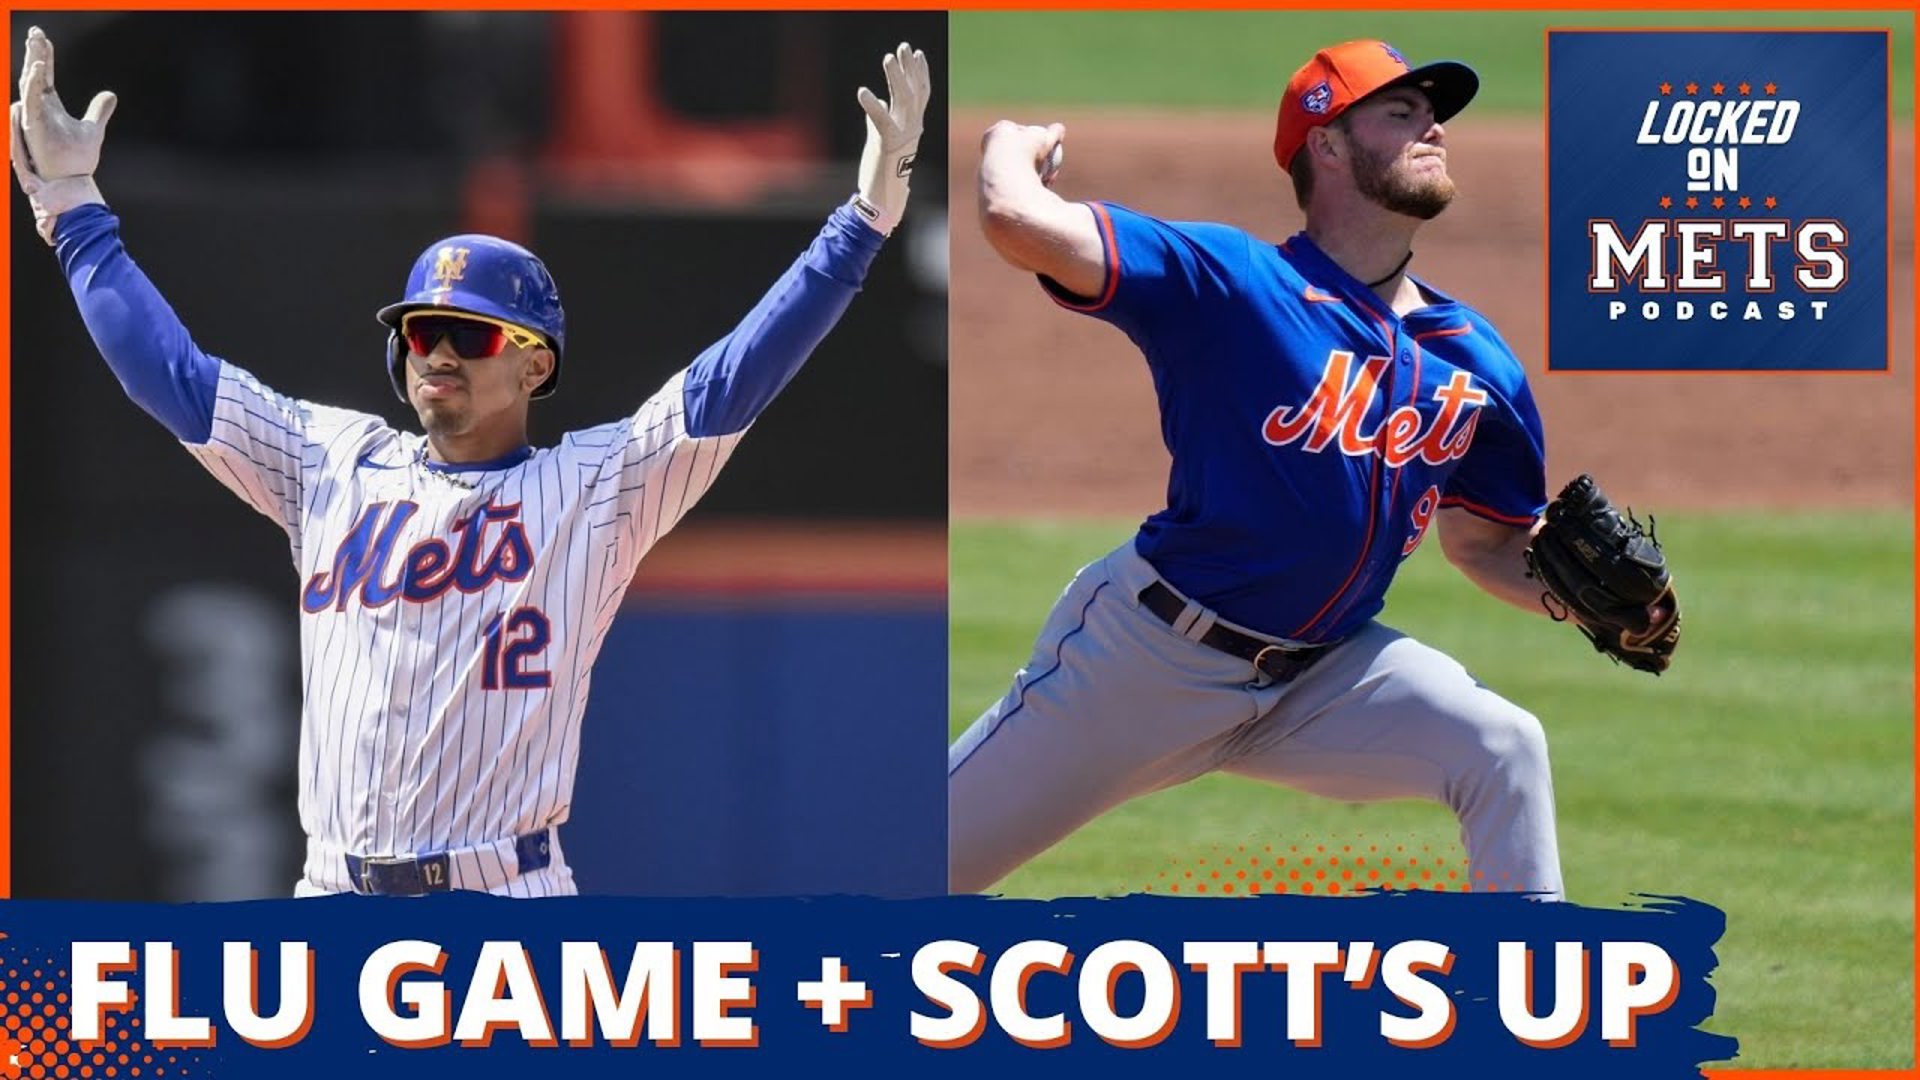 Lindor Leads Mets in 'Flu Game', Christian Scott Gets the Call